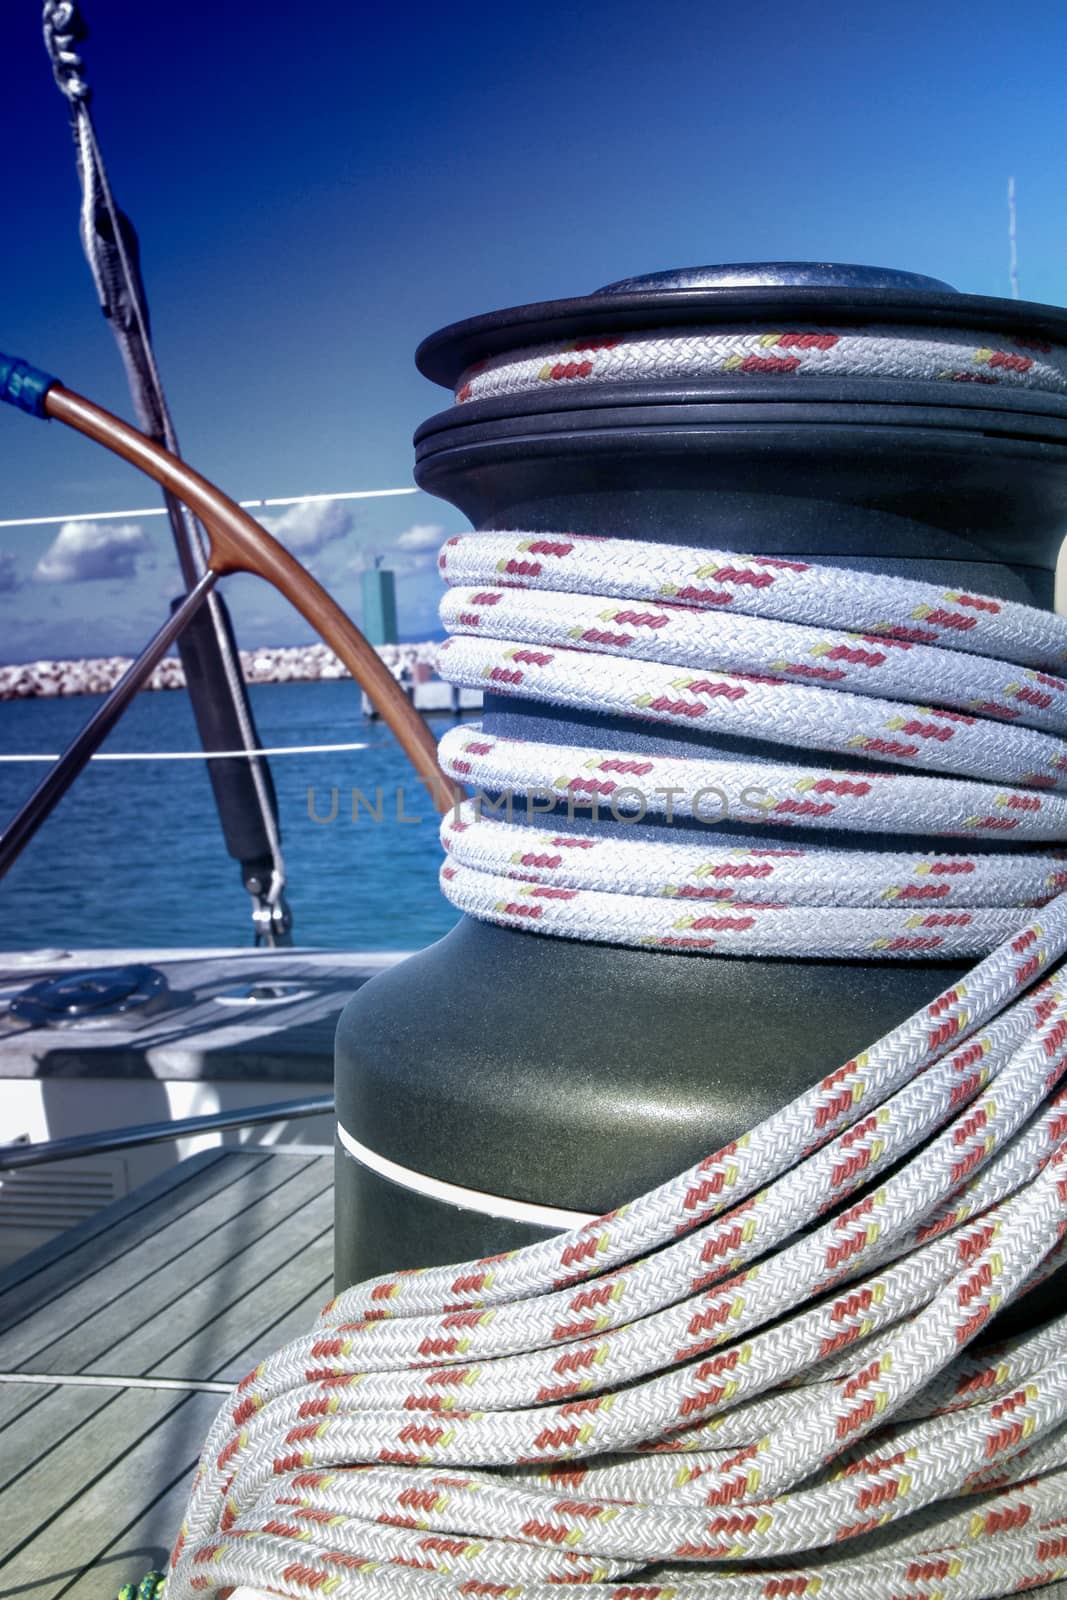 Yacht. Yachting. Sailboat Winch and Rope Yacht detail.